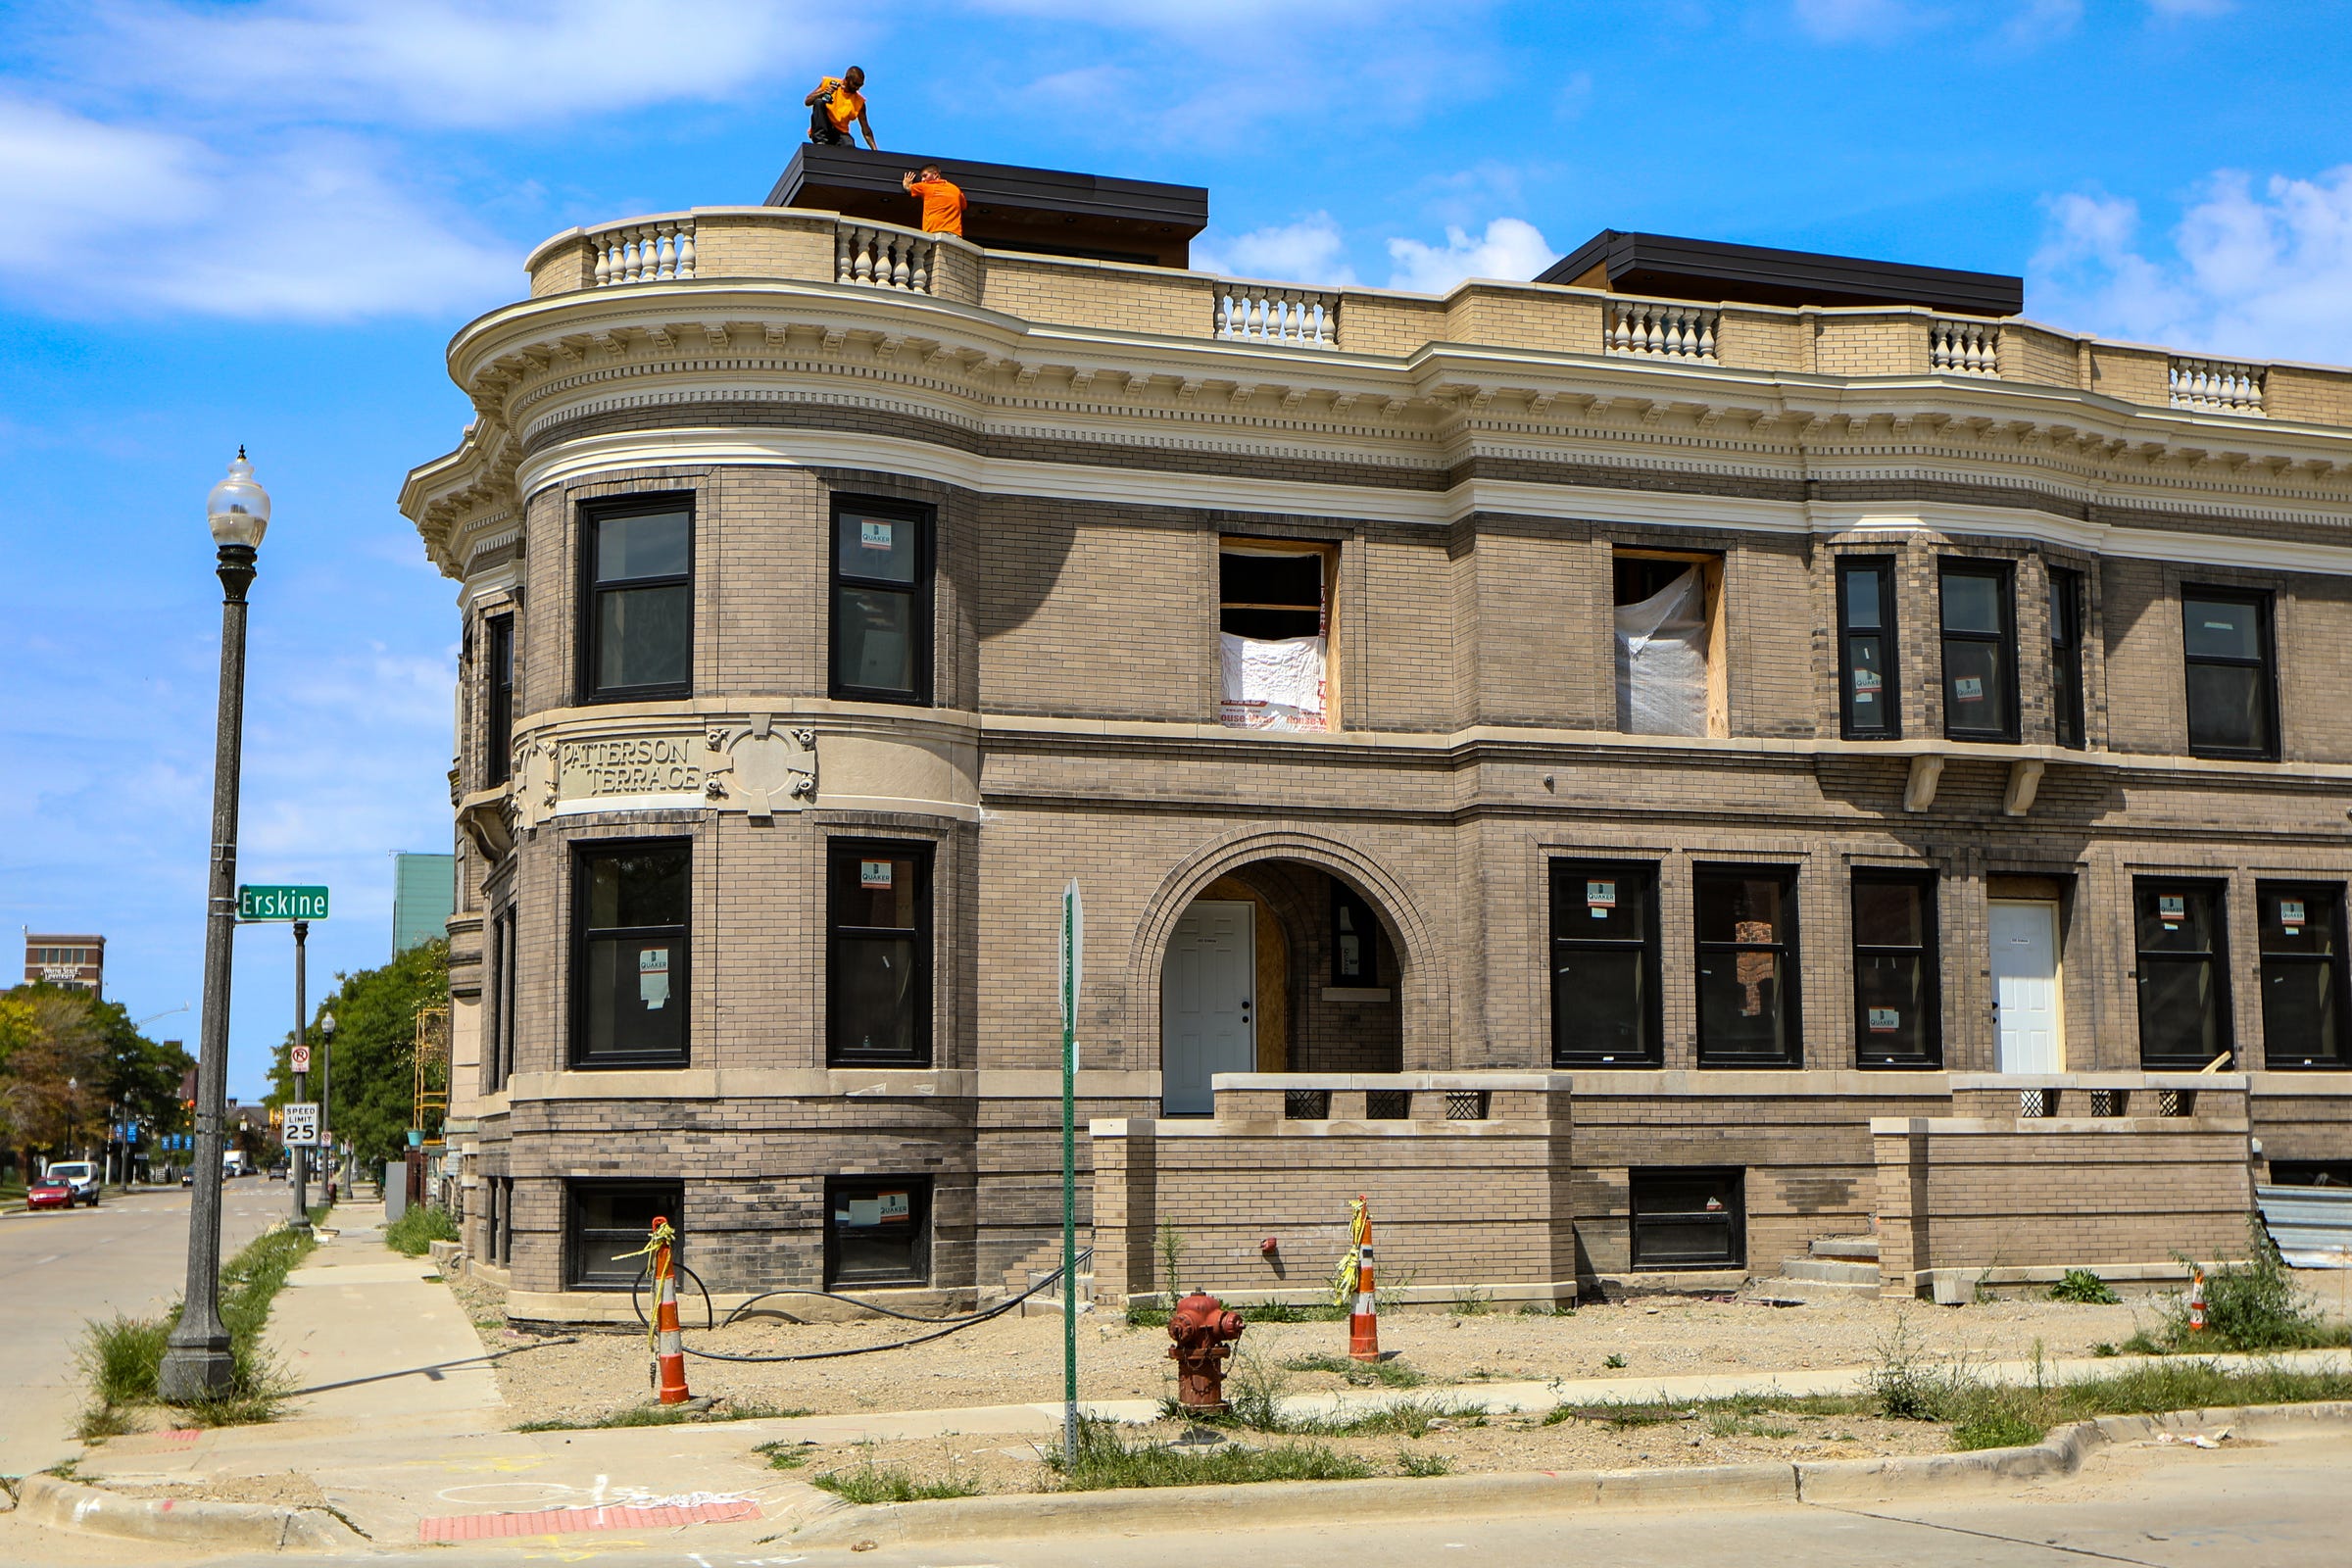 Patterson Terrace, at one time marked for demolition, after multiple exterior restorations, it is being developed in the historic Brush Park neighborhood of Detroit, photographed on Aug. 25.